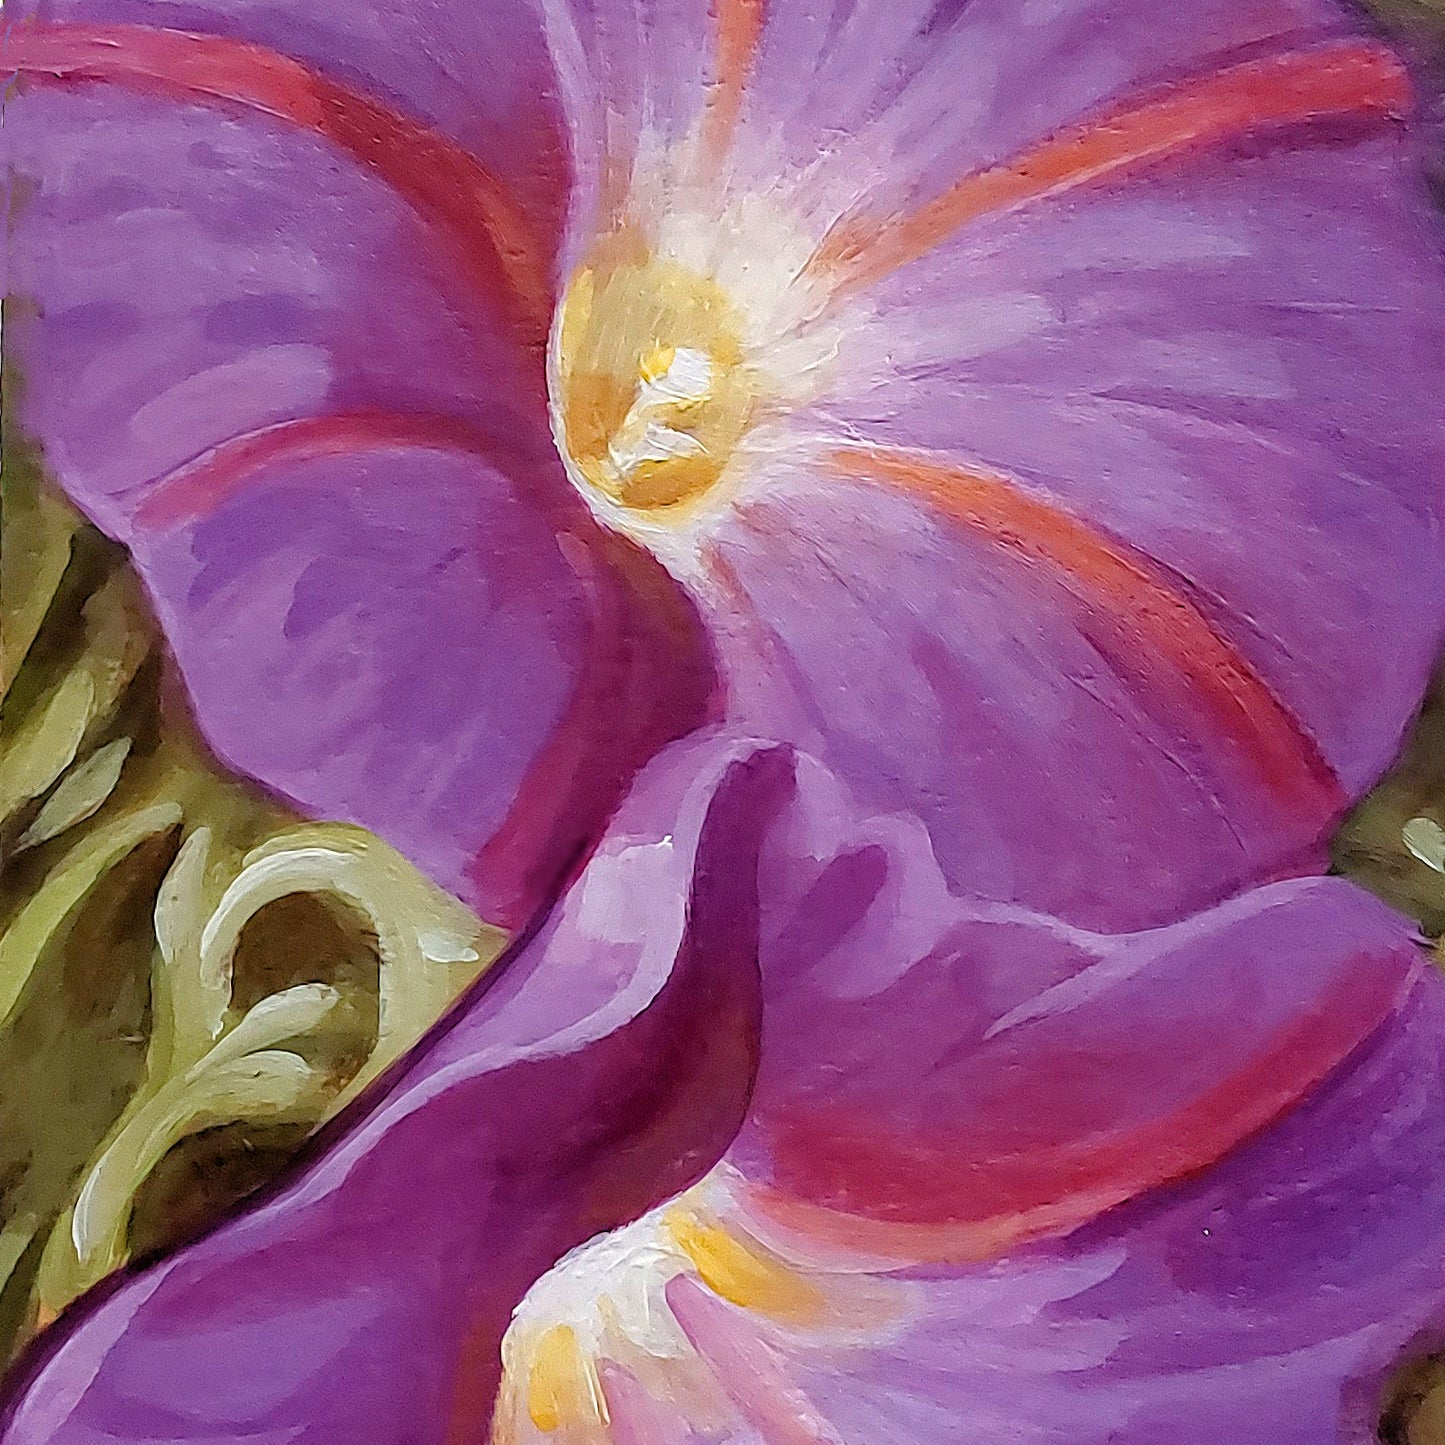 DAY 27 - Morning Glories Original Painting a Day